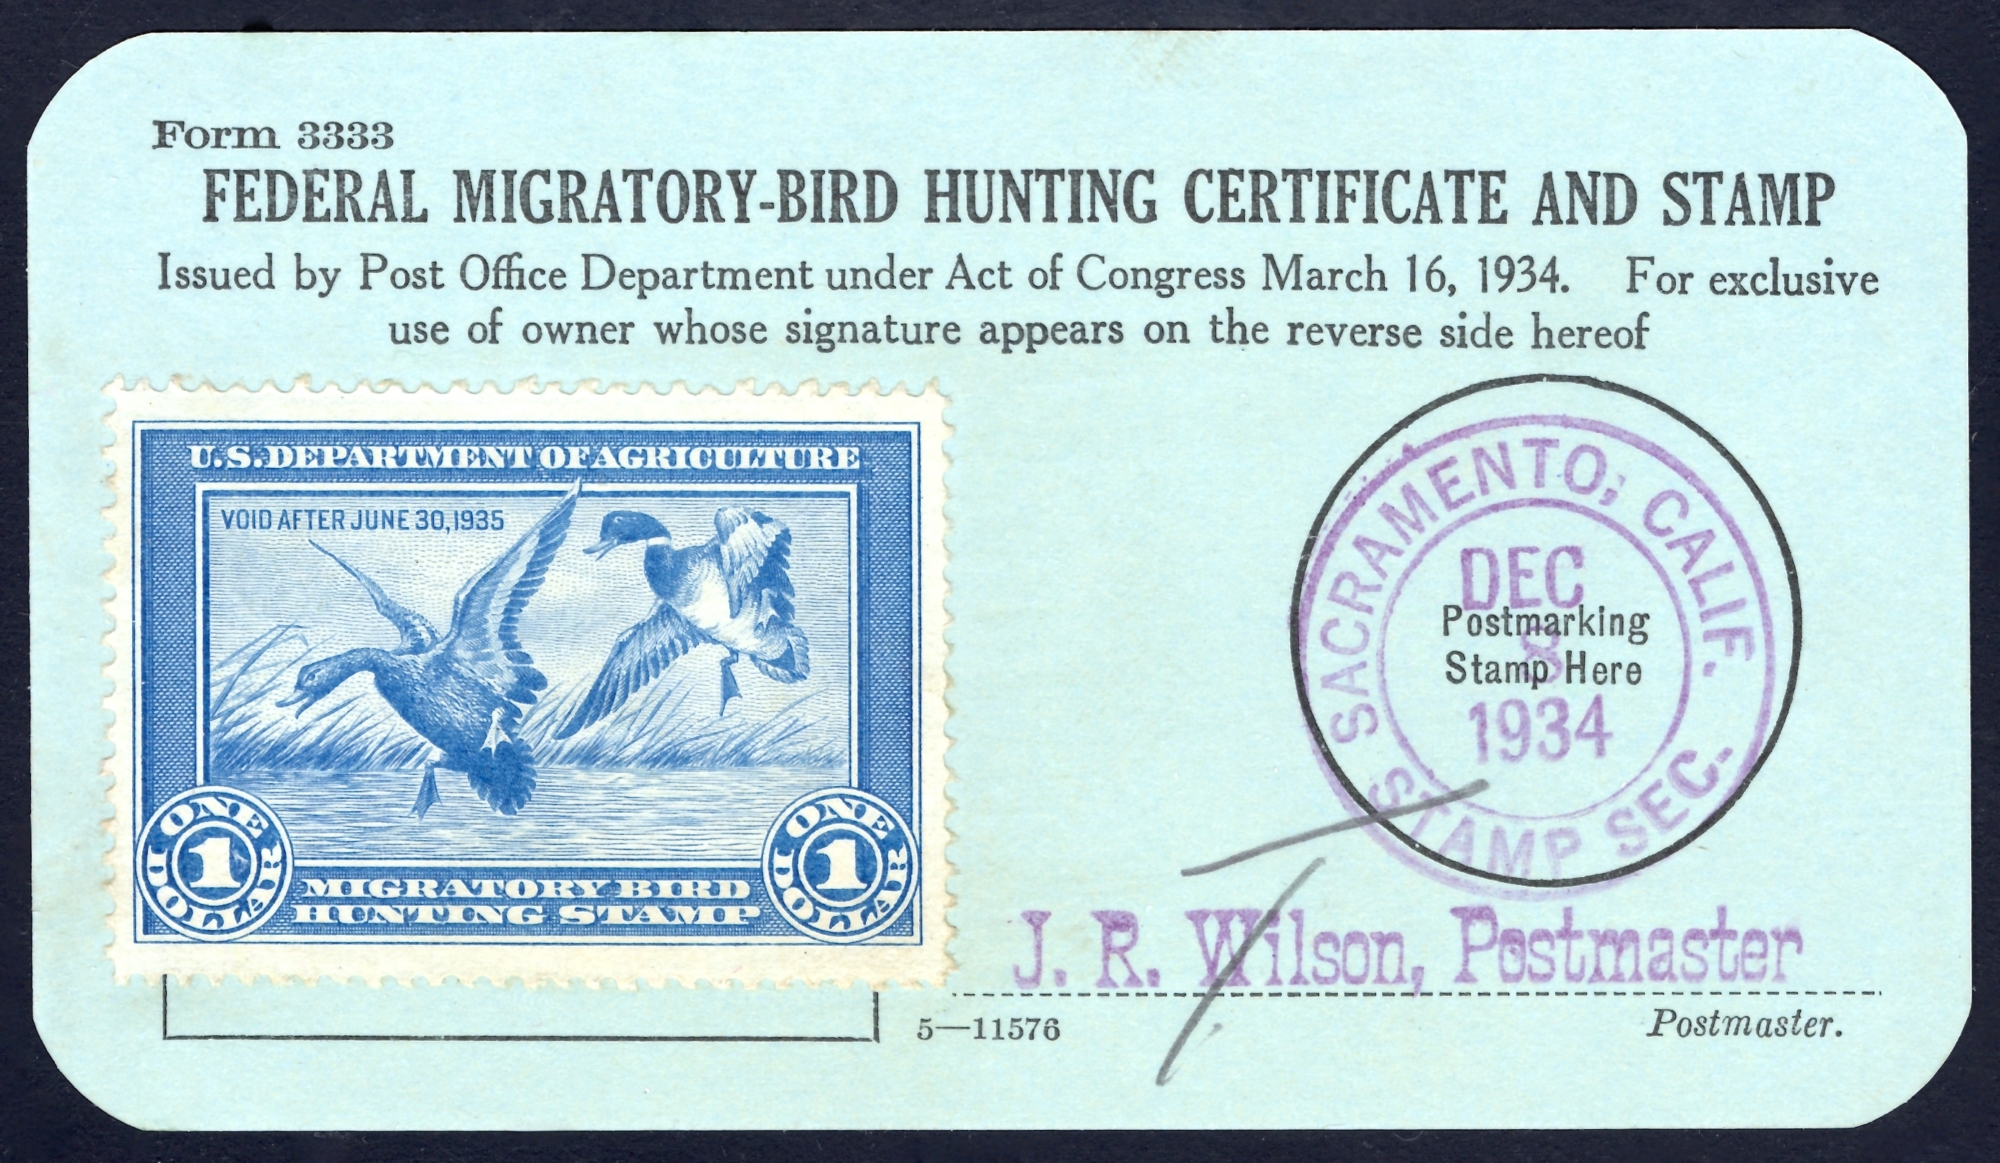 RW1 on Form 3333, cancelled December 8 at Sacrament, California (STAMP SECTION)